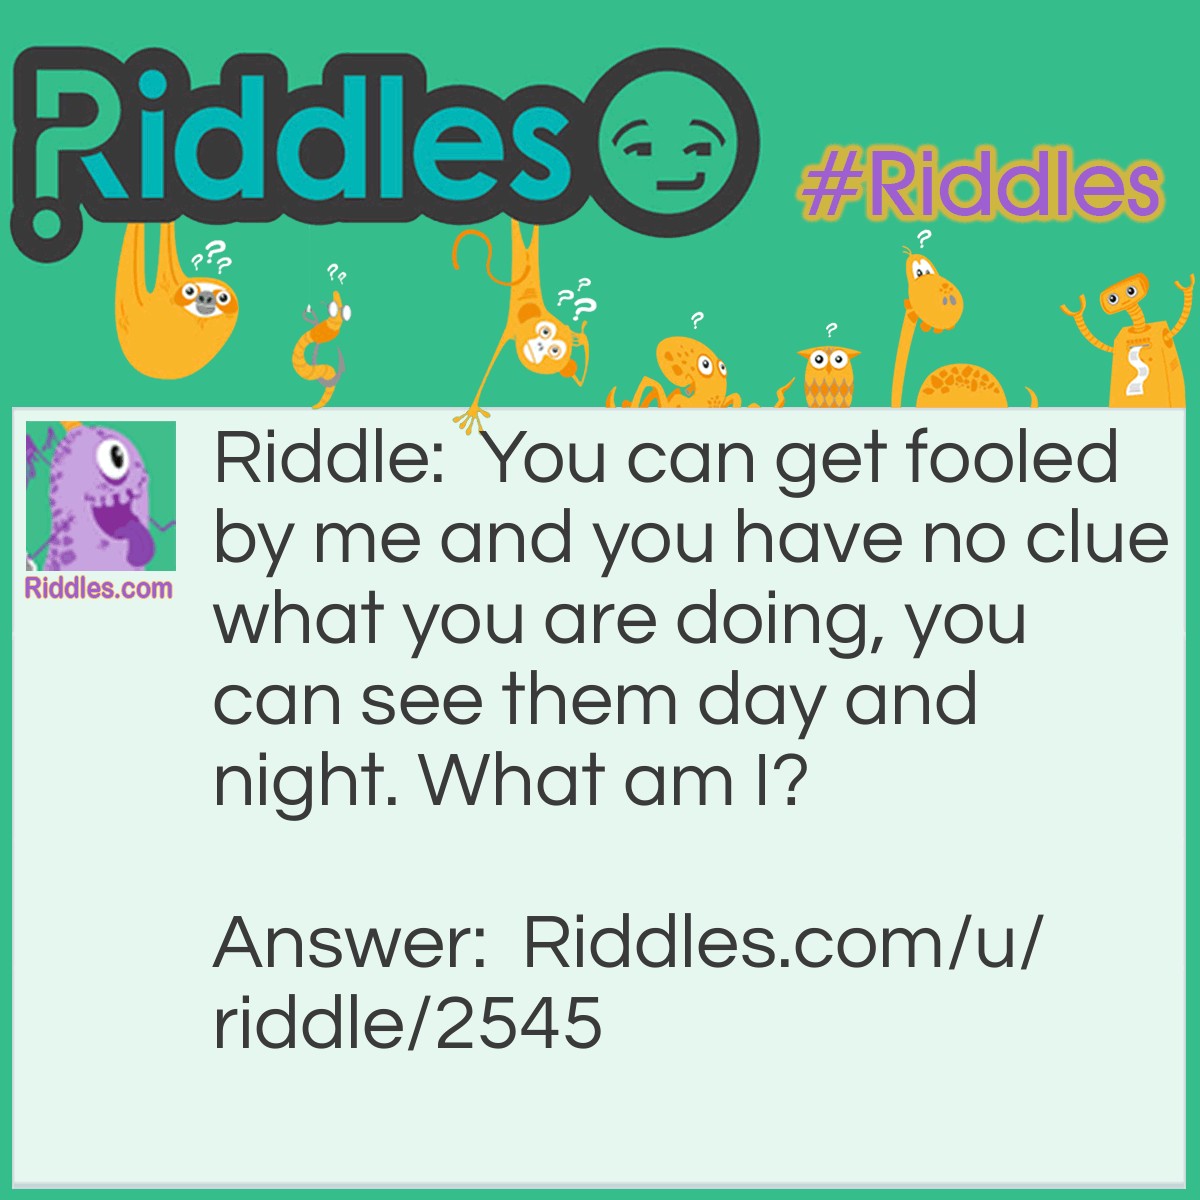 Riddle: You can get fooled by me and you have no clue what you are doing, you can see them day and night. What am I? Answer: A sign.